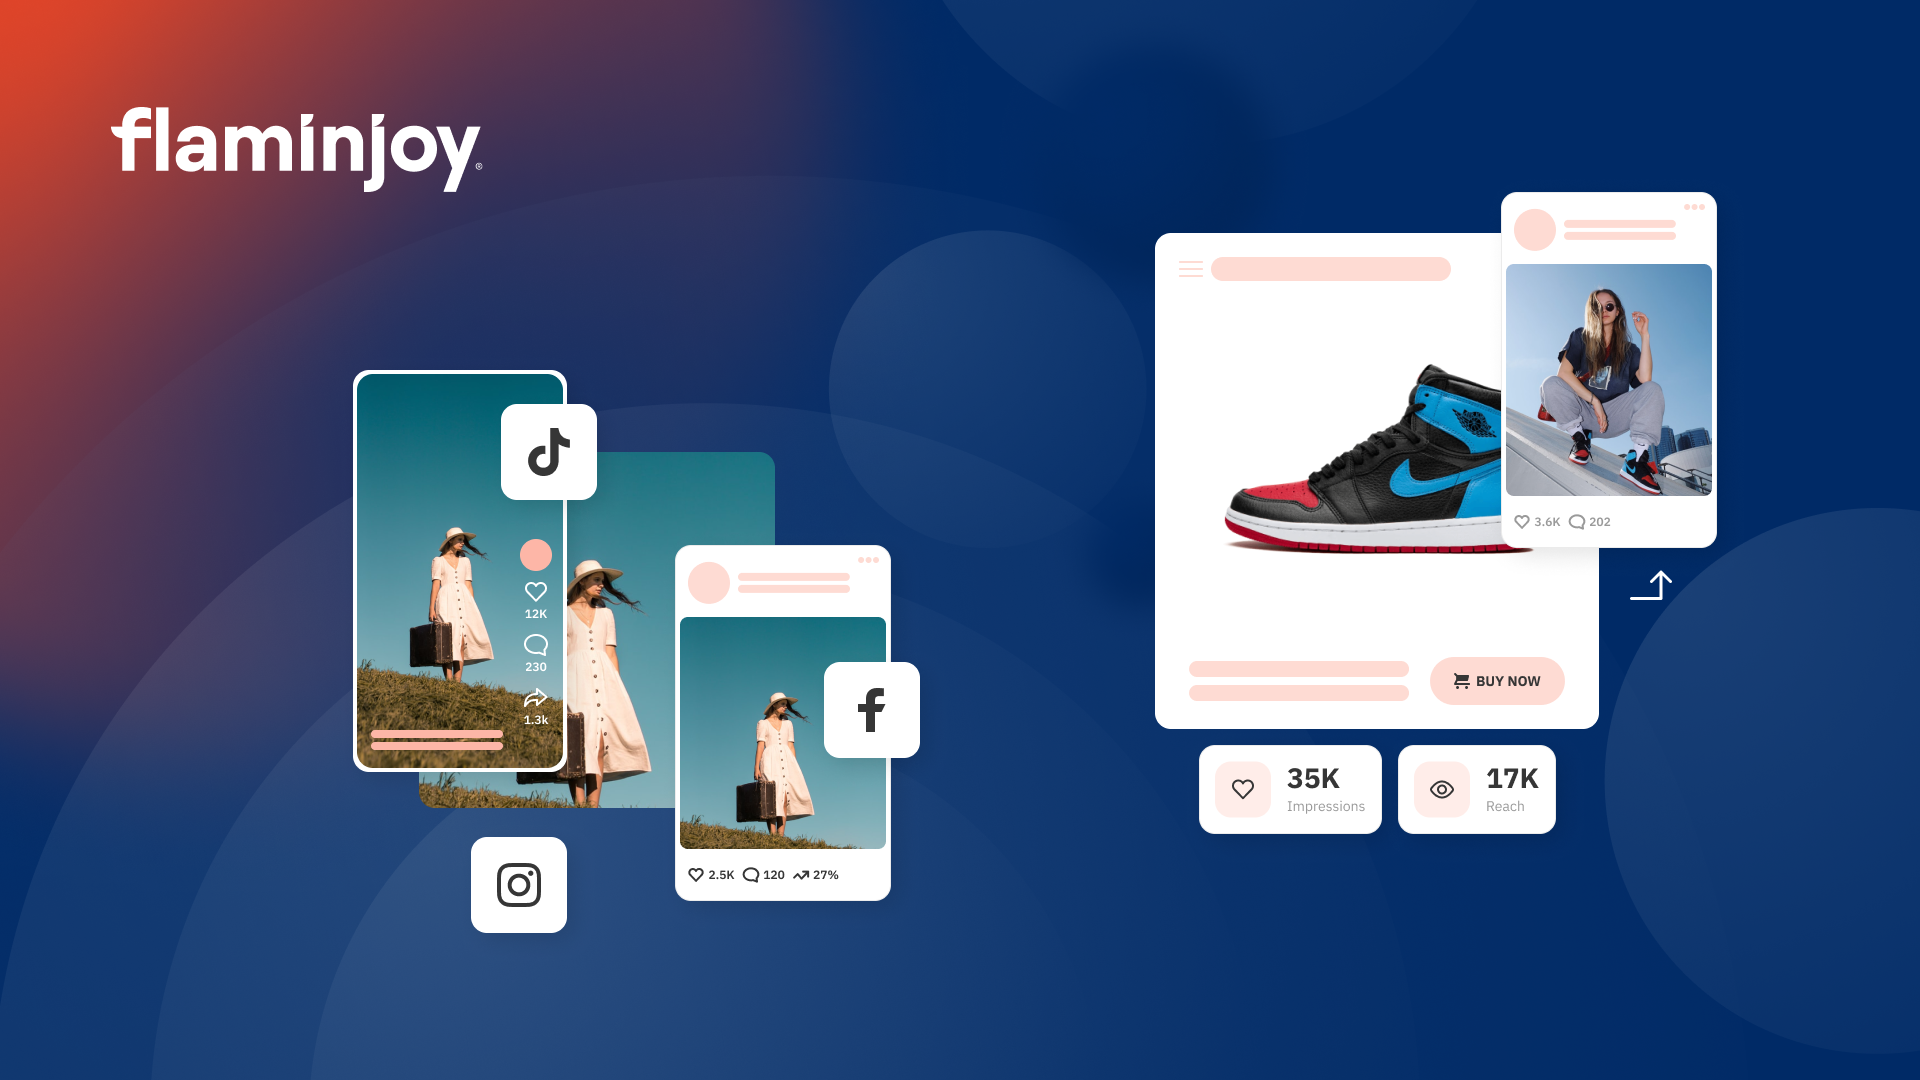 Product Display is a simpley way to transform your standard product images into engaging creatives. Add them to your existing content strategy and use Shoppable Pins to make the content interactive.